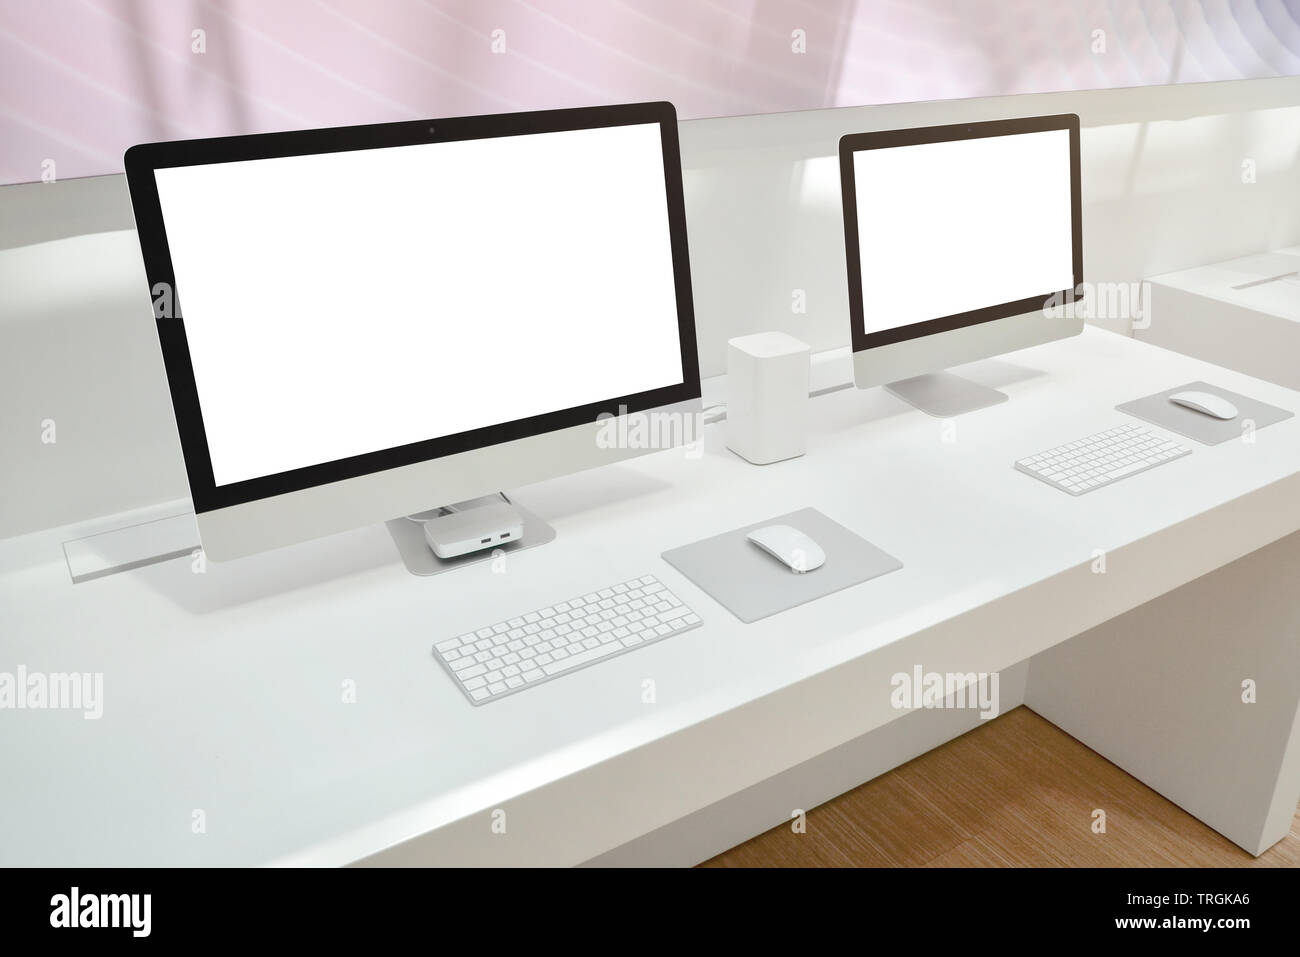 Two Computers With Isolated Screens For Mockup On Office Desk